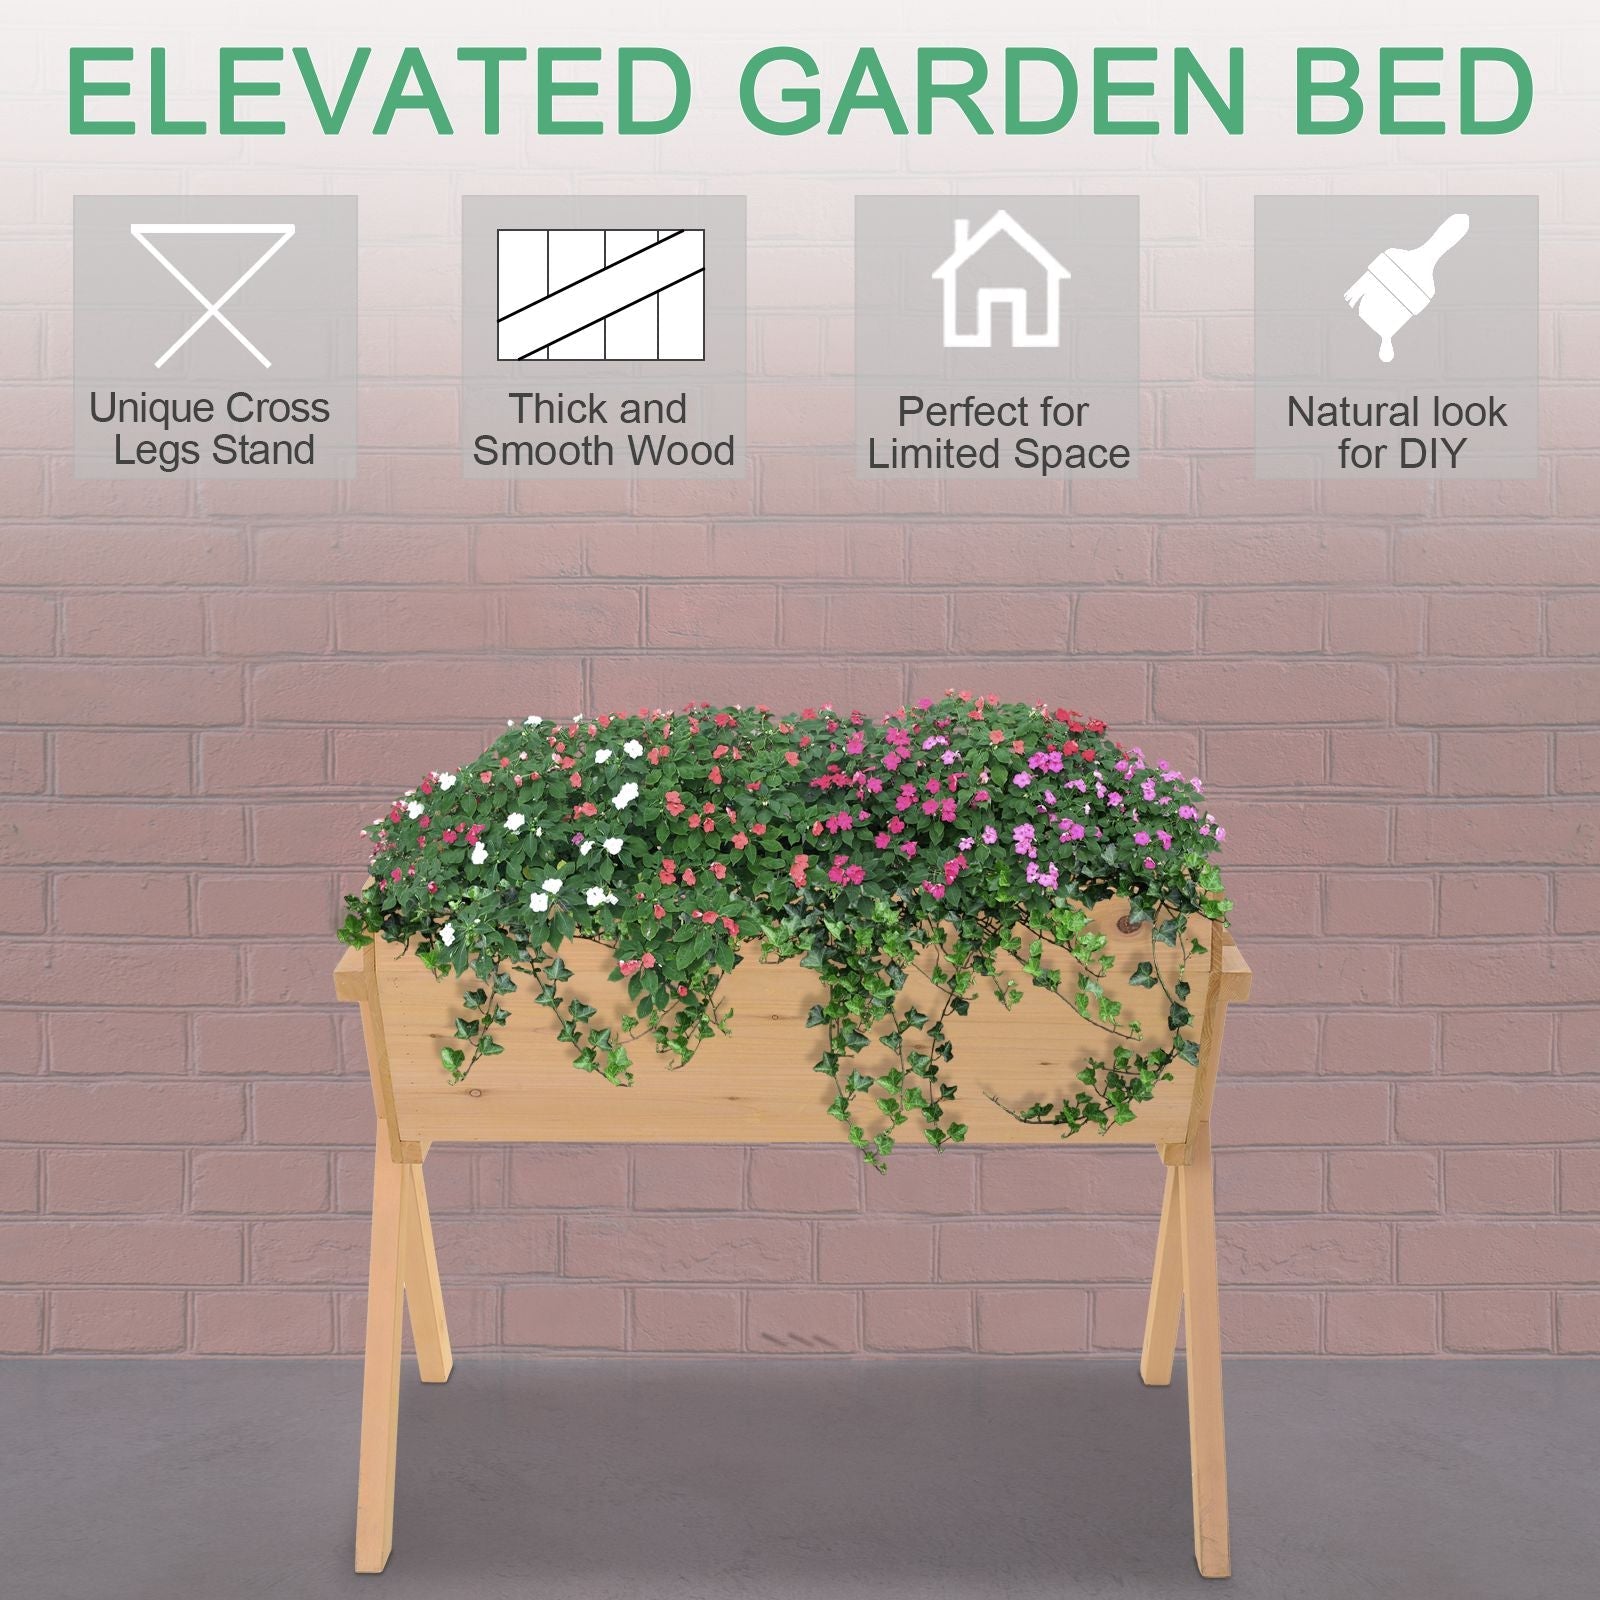 39'' x 28'' Raised Garden Bed with Legs, Elevated Wooden Planter Box with Bed Liner for Vegetables, Flowers Herbs, Backyard Patio Balcony Use - Gallery Canada